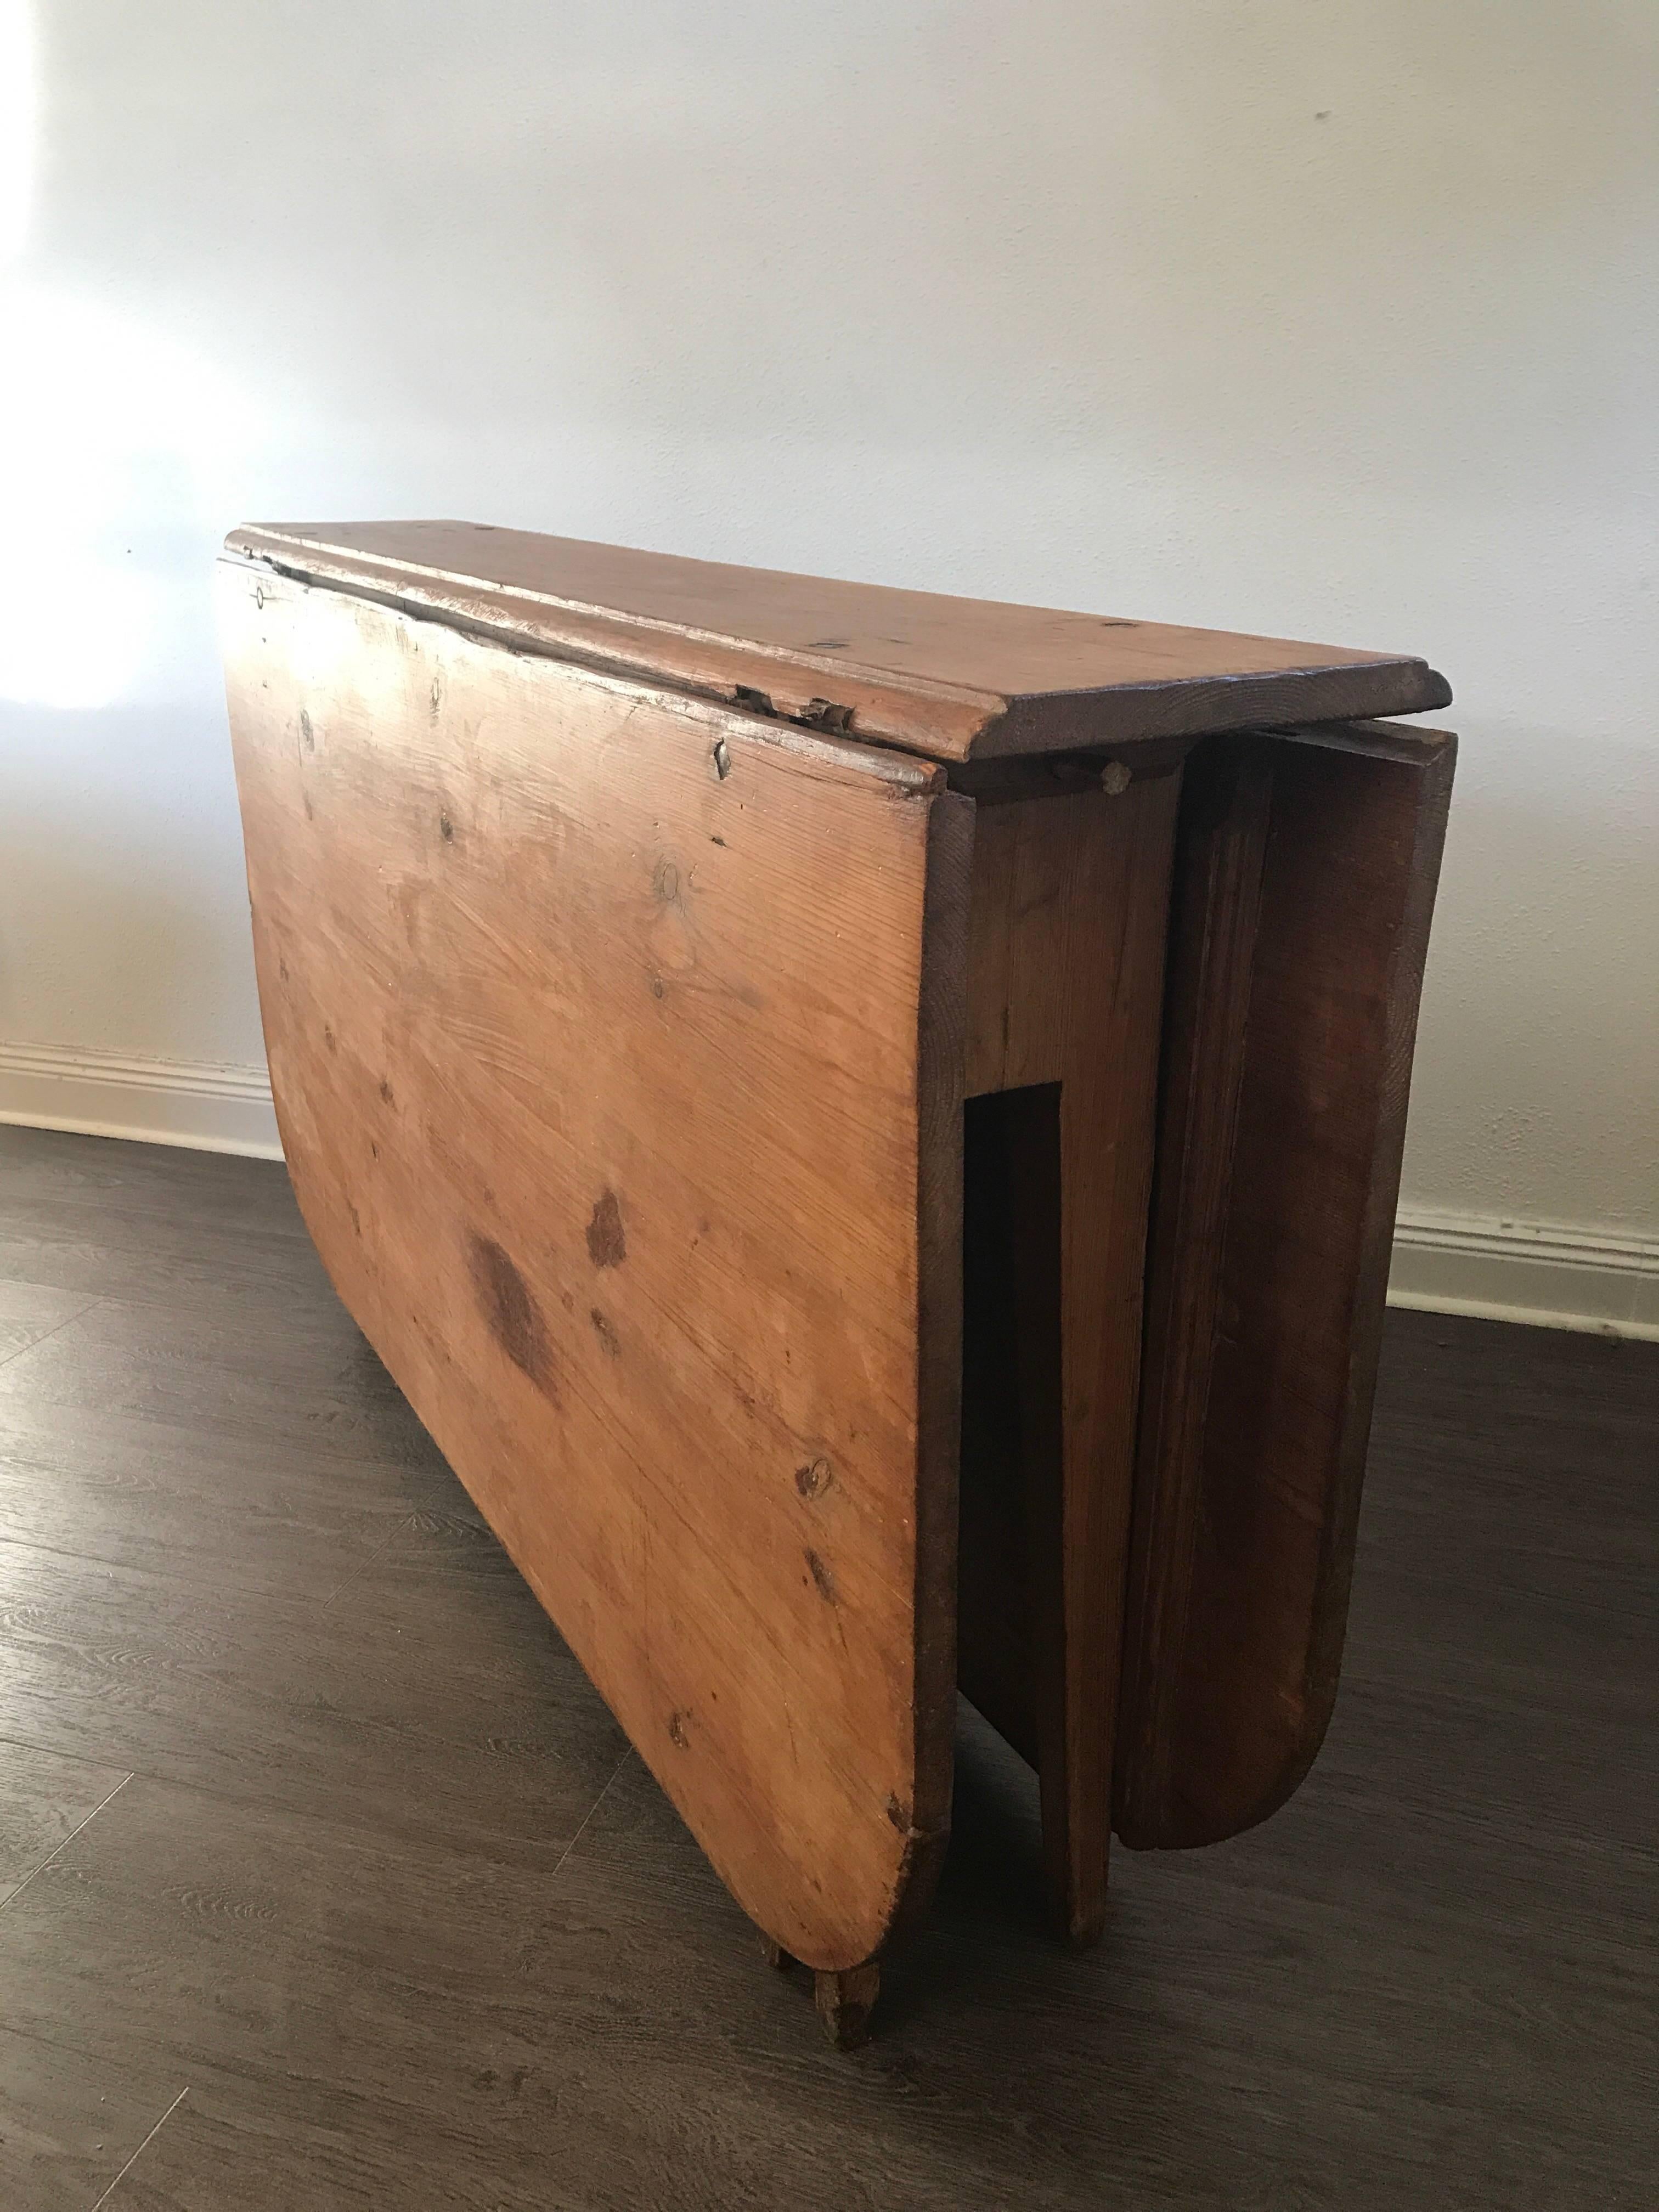 Large Swedish 18th century pine wood drop-leaf gate leg table.
A fantastic and very beautiful drop leaf table made out of pine in a very classy and high end way. Please see all the pictures for close up details that make this table very rare. The